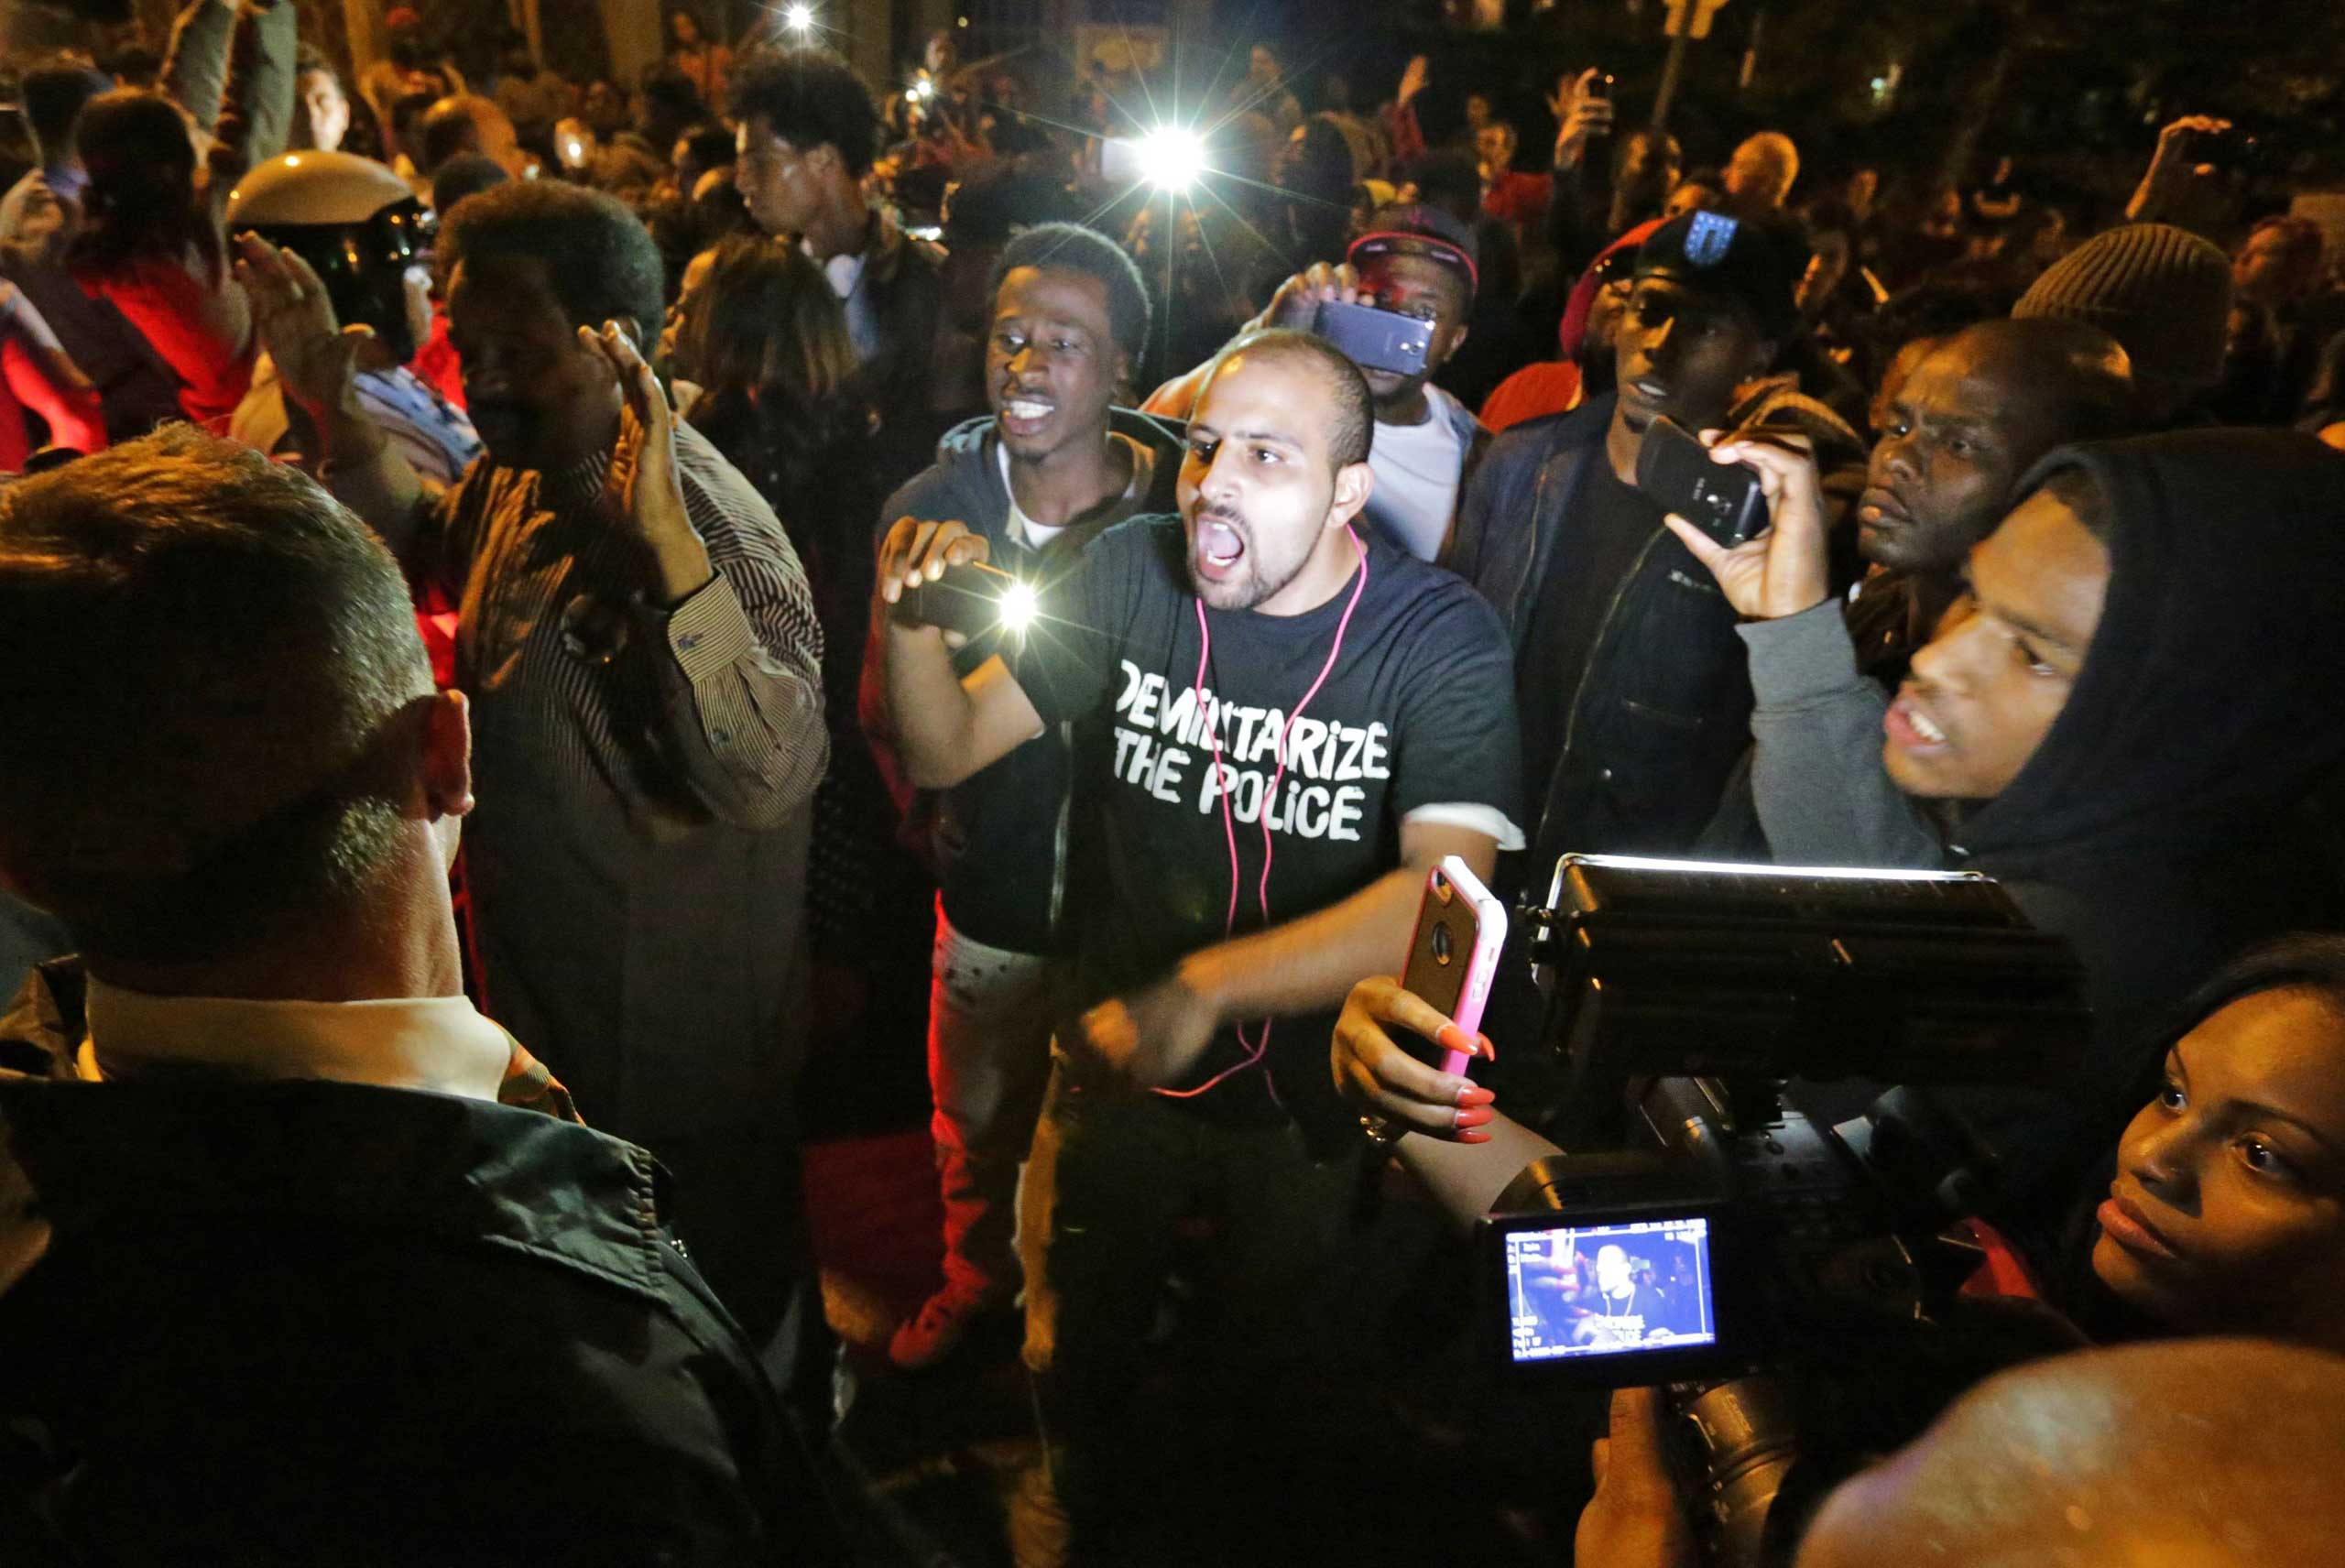 Crowds confront police near the scene in south St. Louis where a man was fatally shot by an off-duty St. Louis police officer on Oct. 8, 2014. (David Carson—AP)